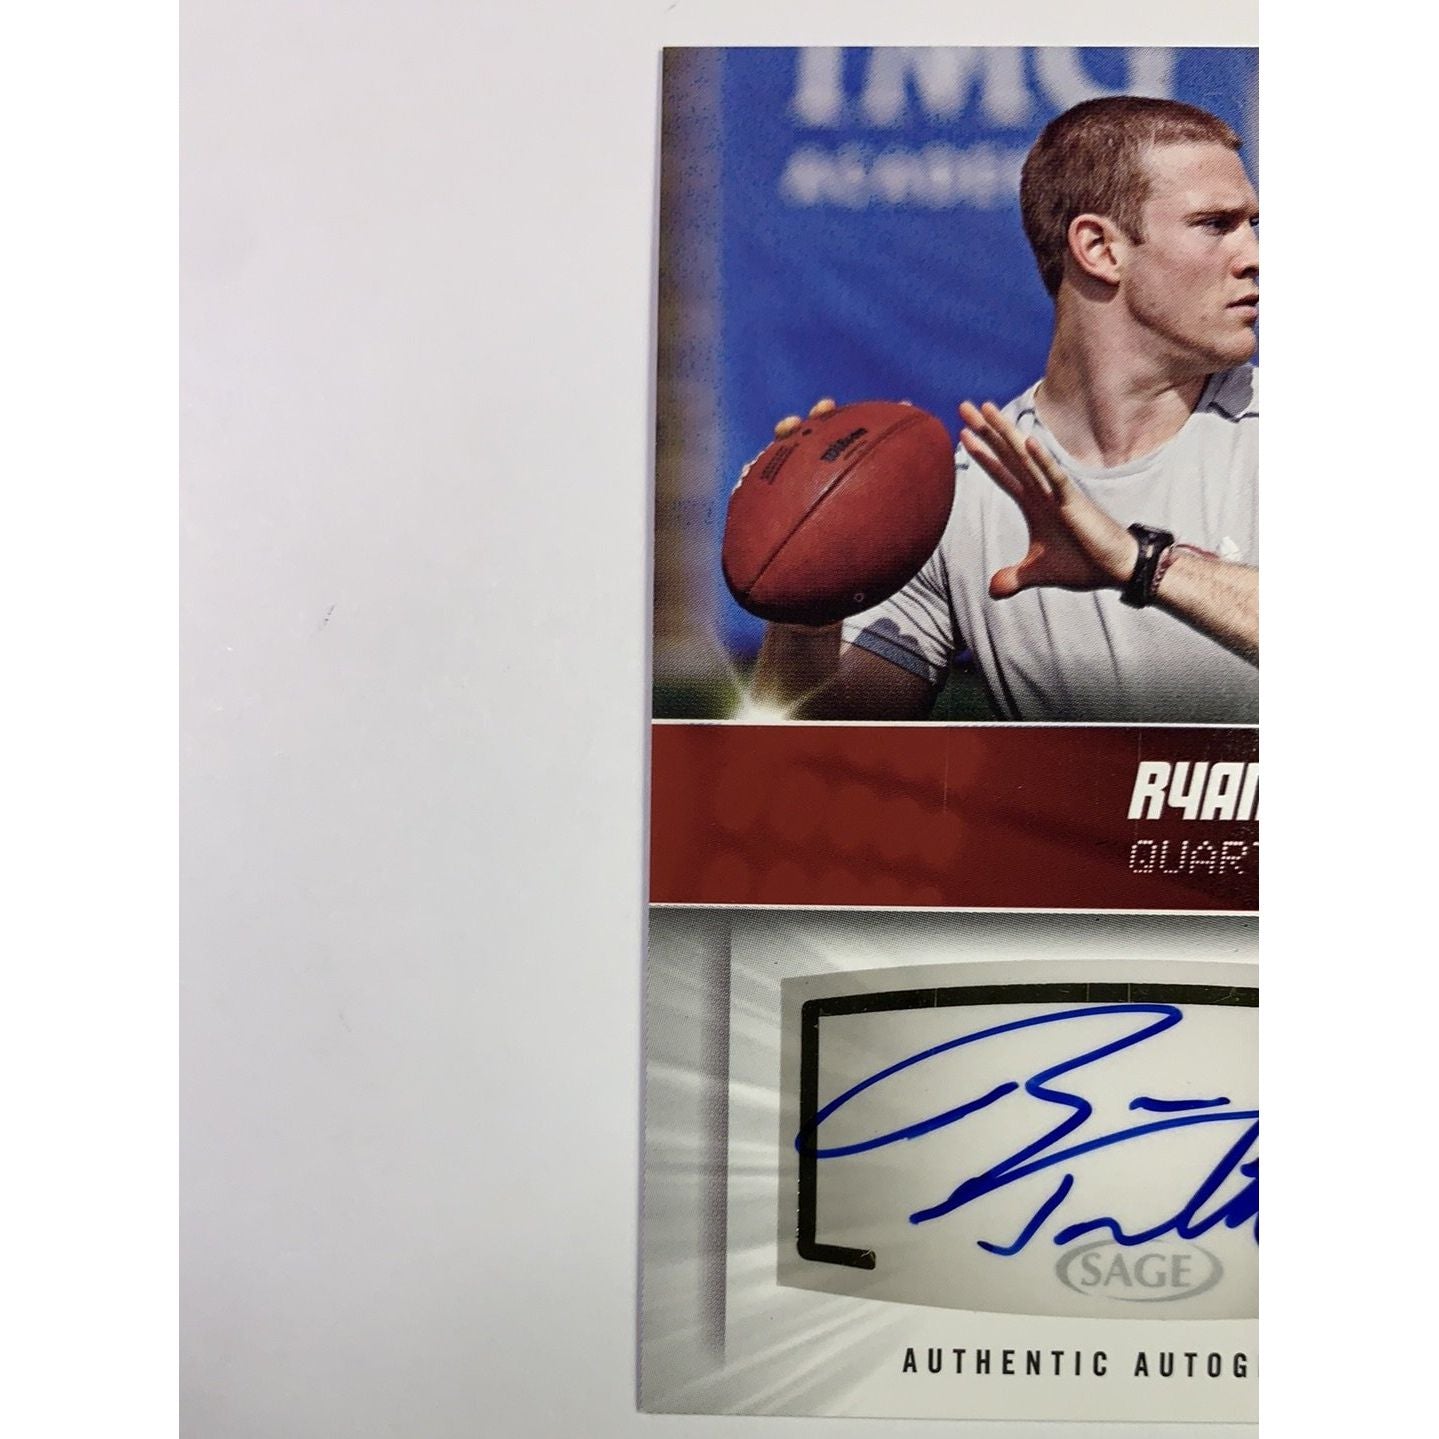  2012 Sage SLC Hit Ryan Tannehill Auto  Local Legends Cards & Collectibles